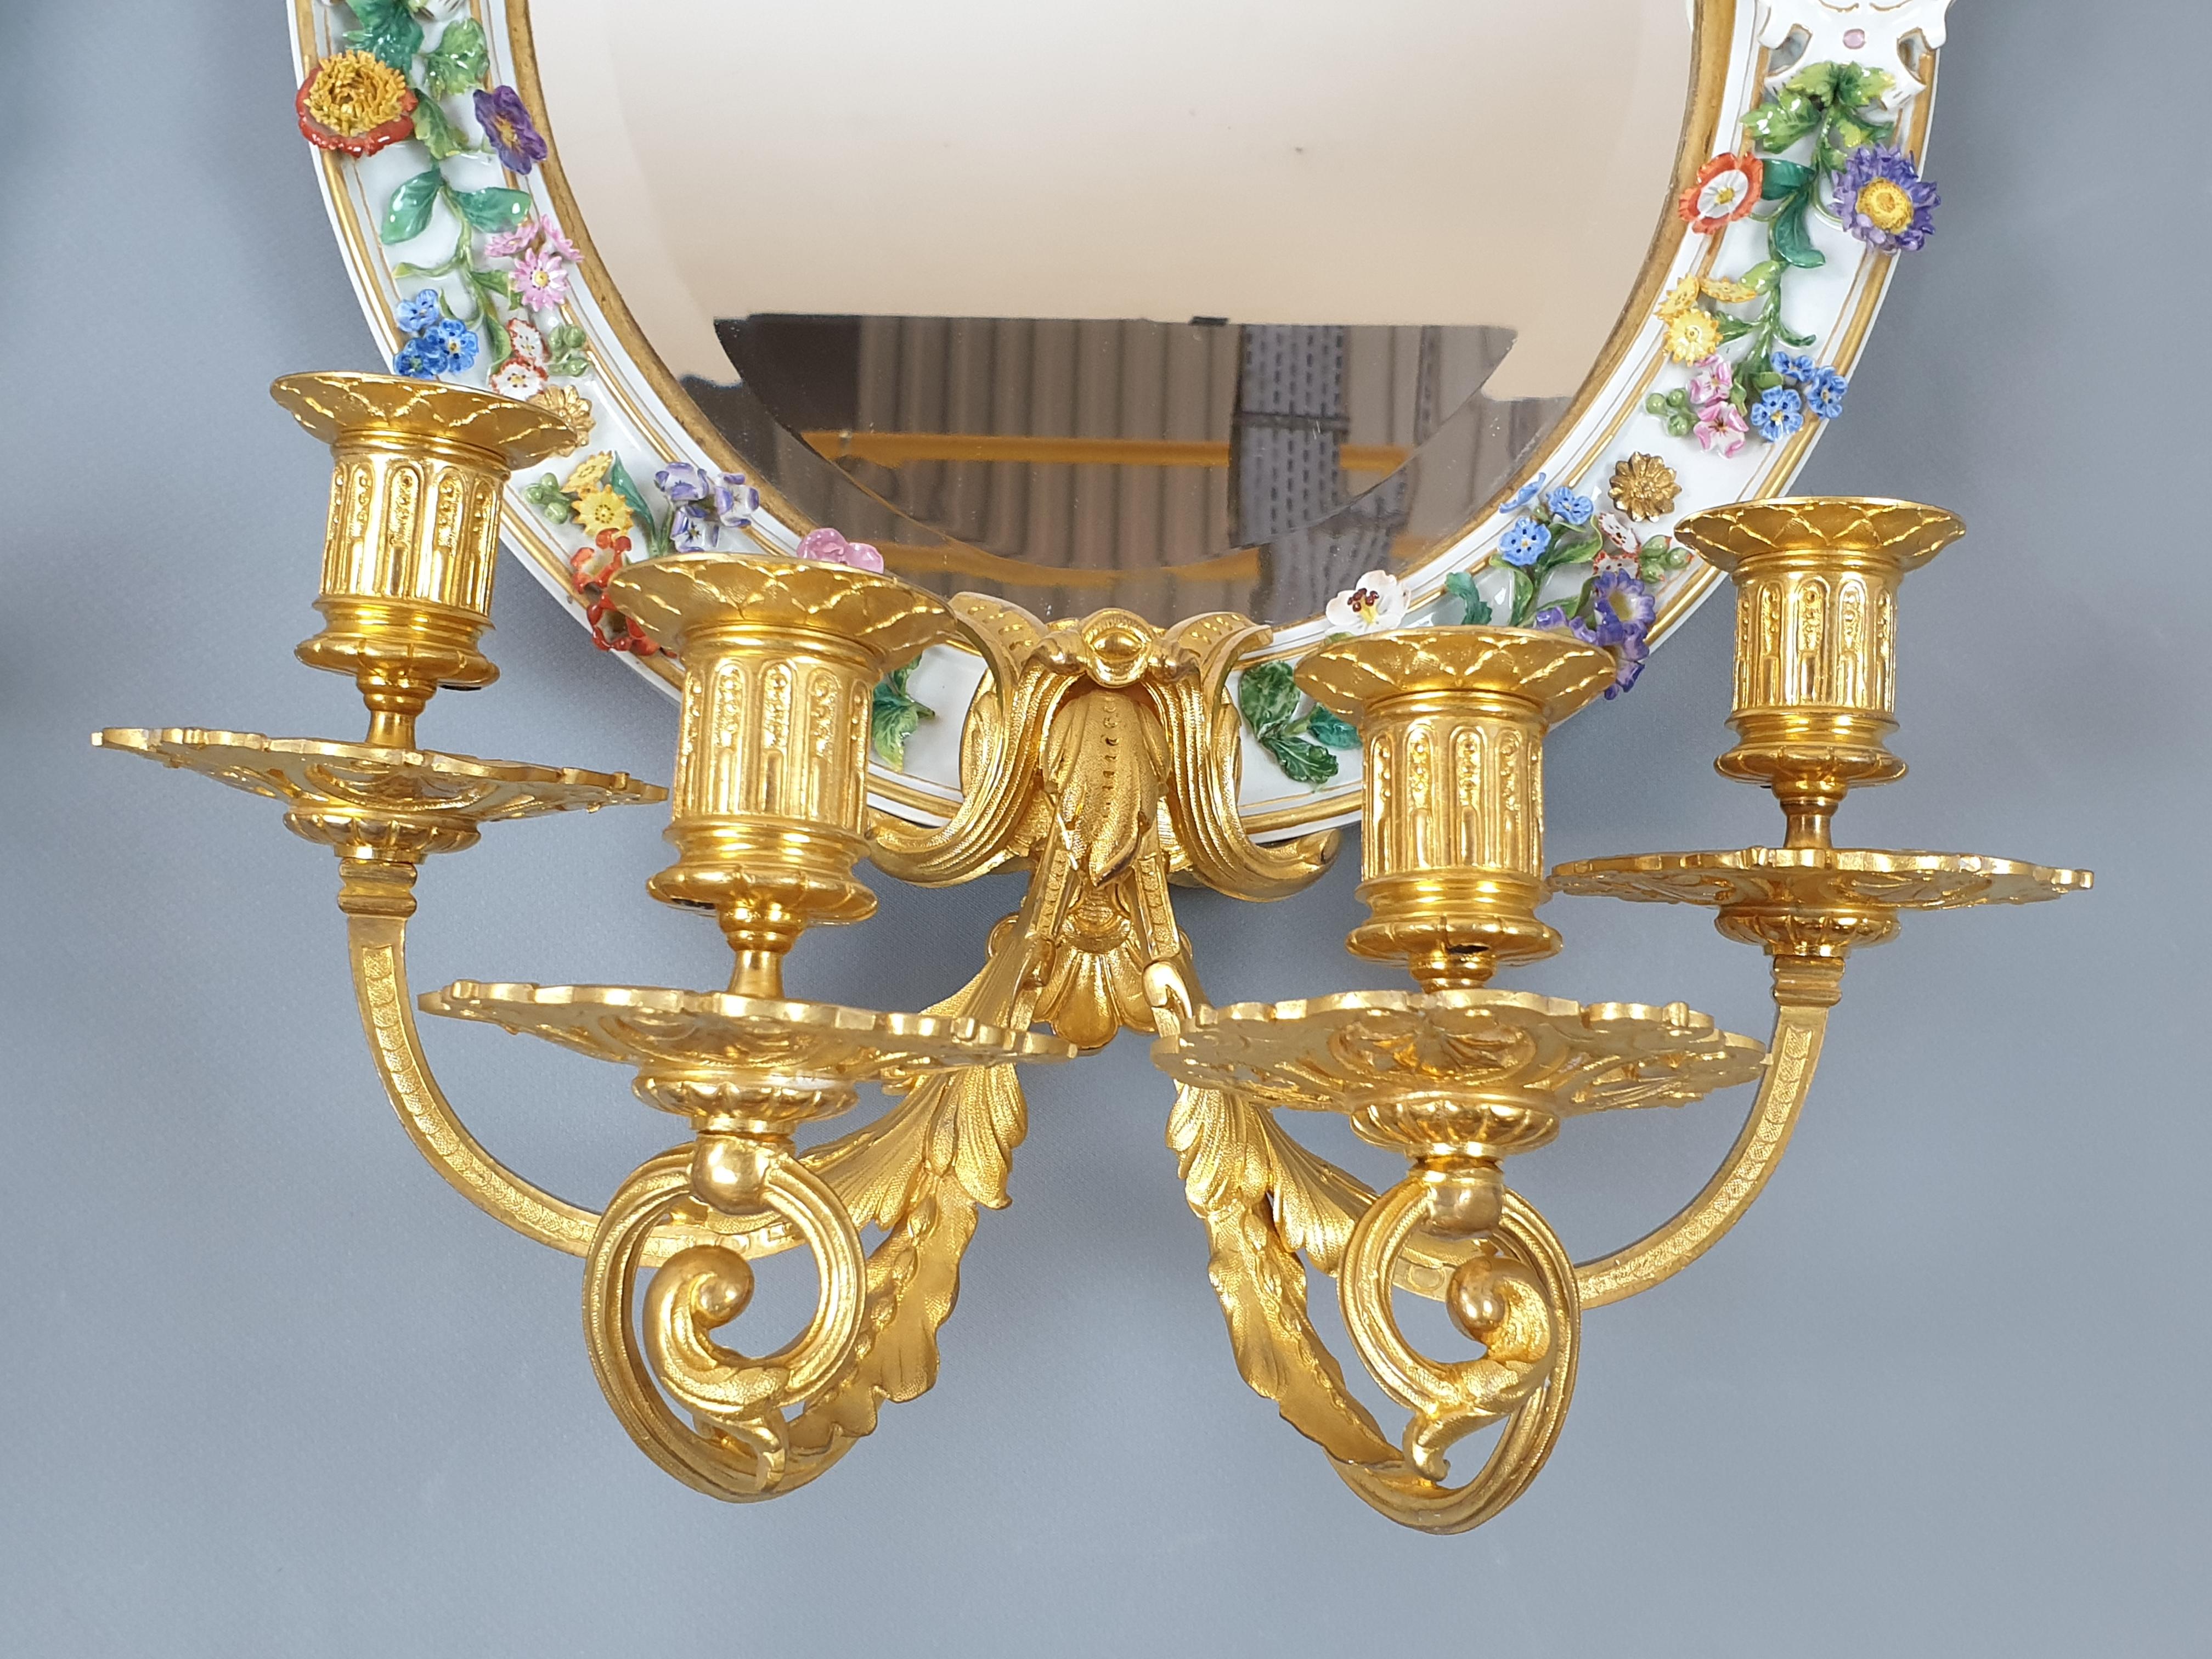 Extremely rare pair of sconces, consisting of porcelain mirrors decorated with figures of Putts and floral motifs, combined with gilt bronze arms, Meissen, circa 1870. Perfect condition, highest quality porcelain and bronze castings. Collectible